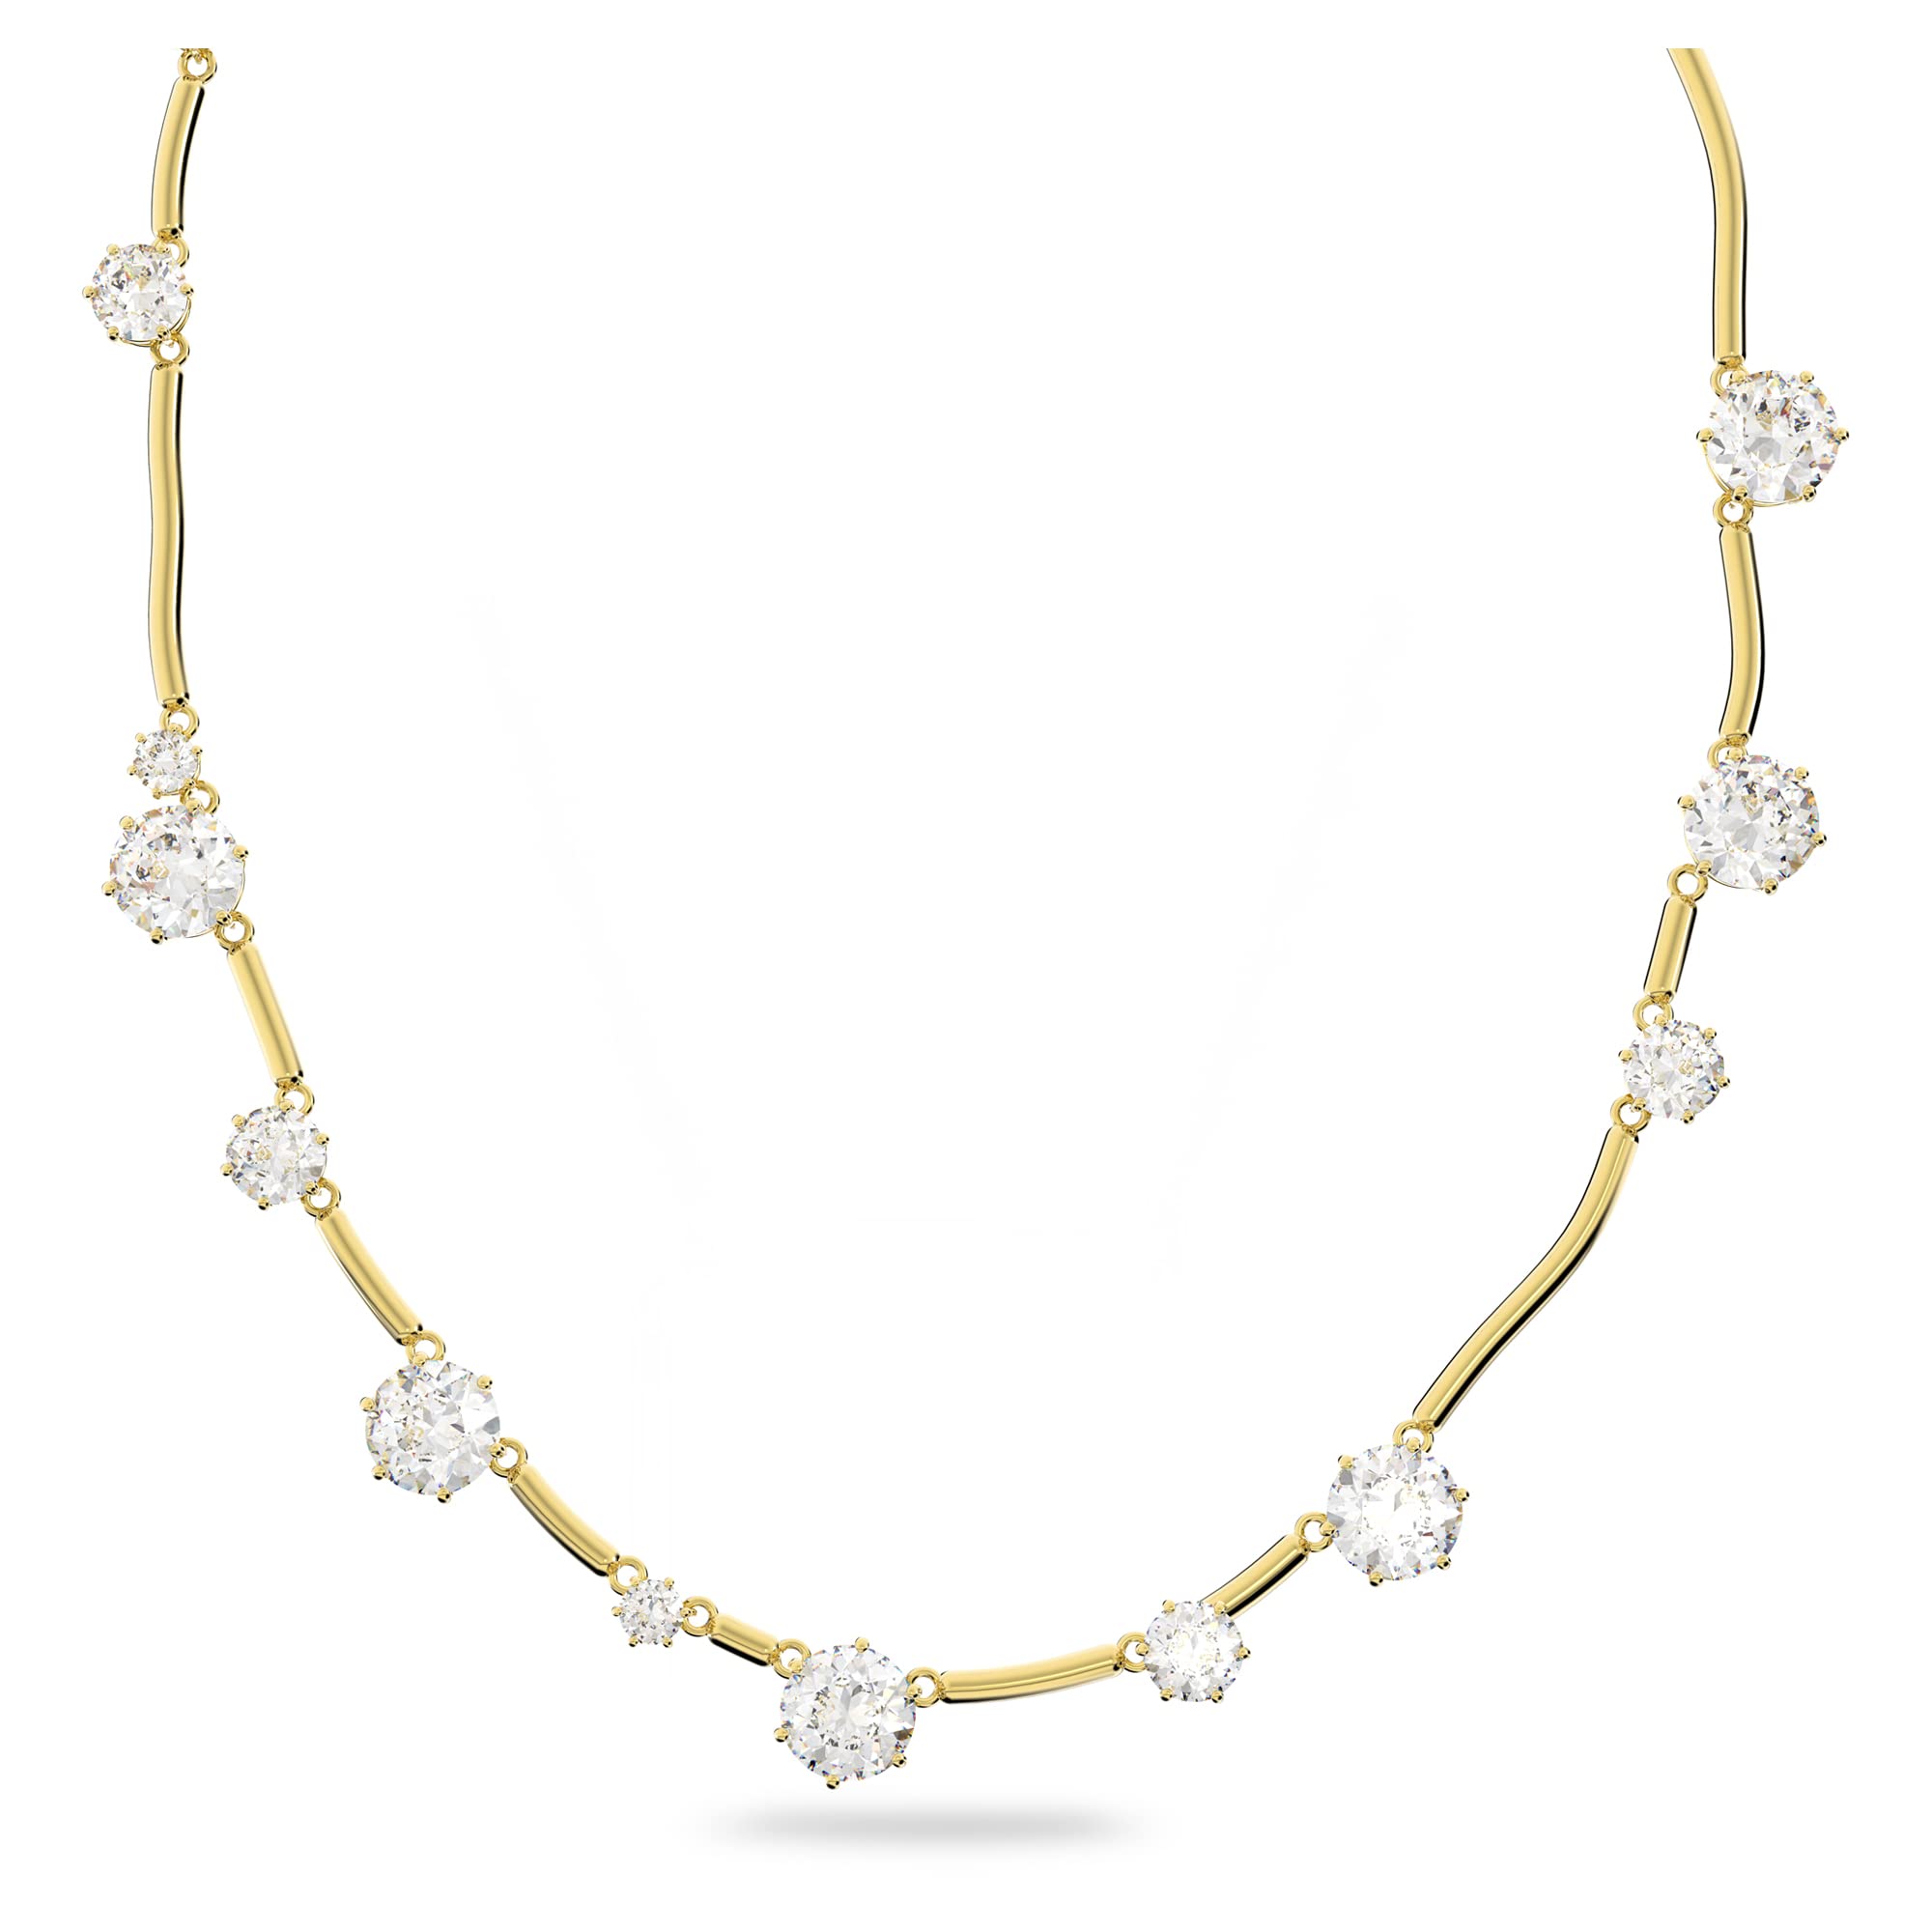 SWAROVSKI Constella Necklace Collection with Clear Crystals